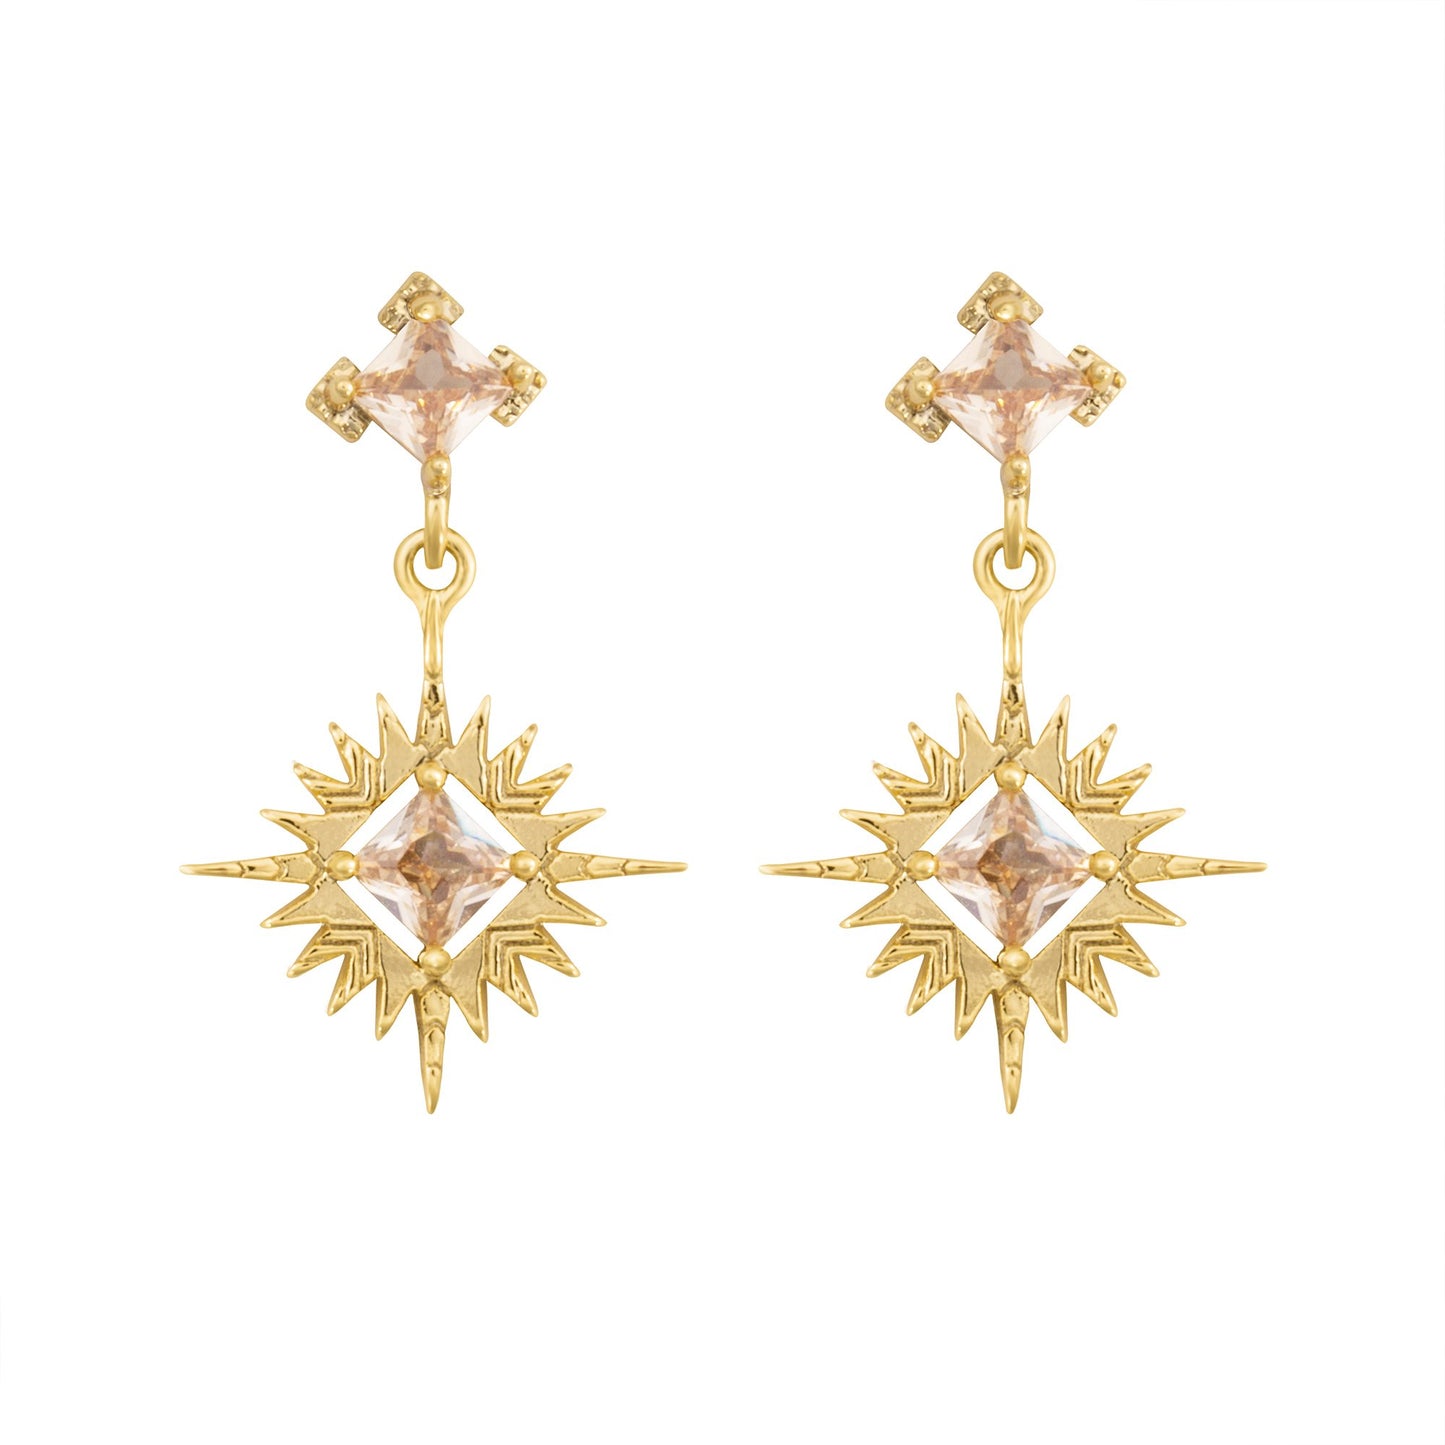 A Dusting of Jewels - Starburst Earrings | Gold